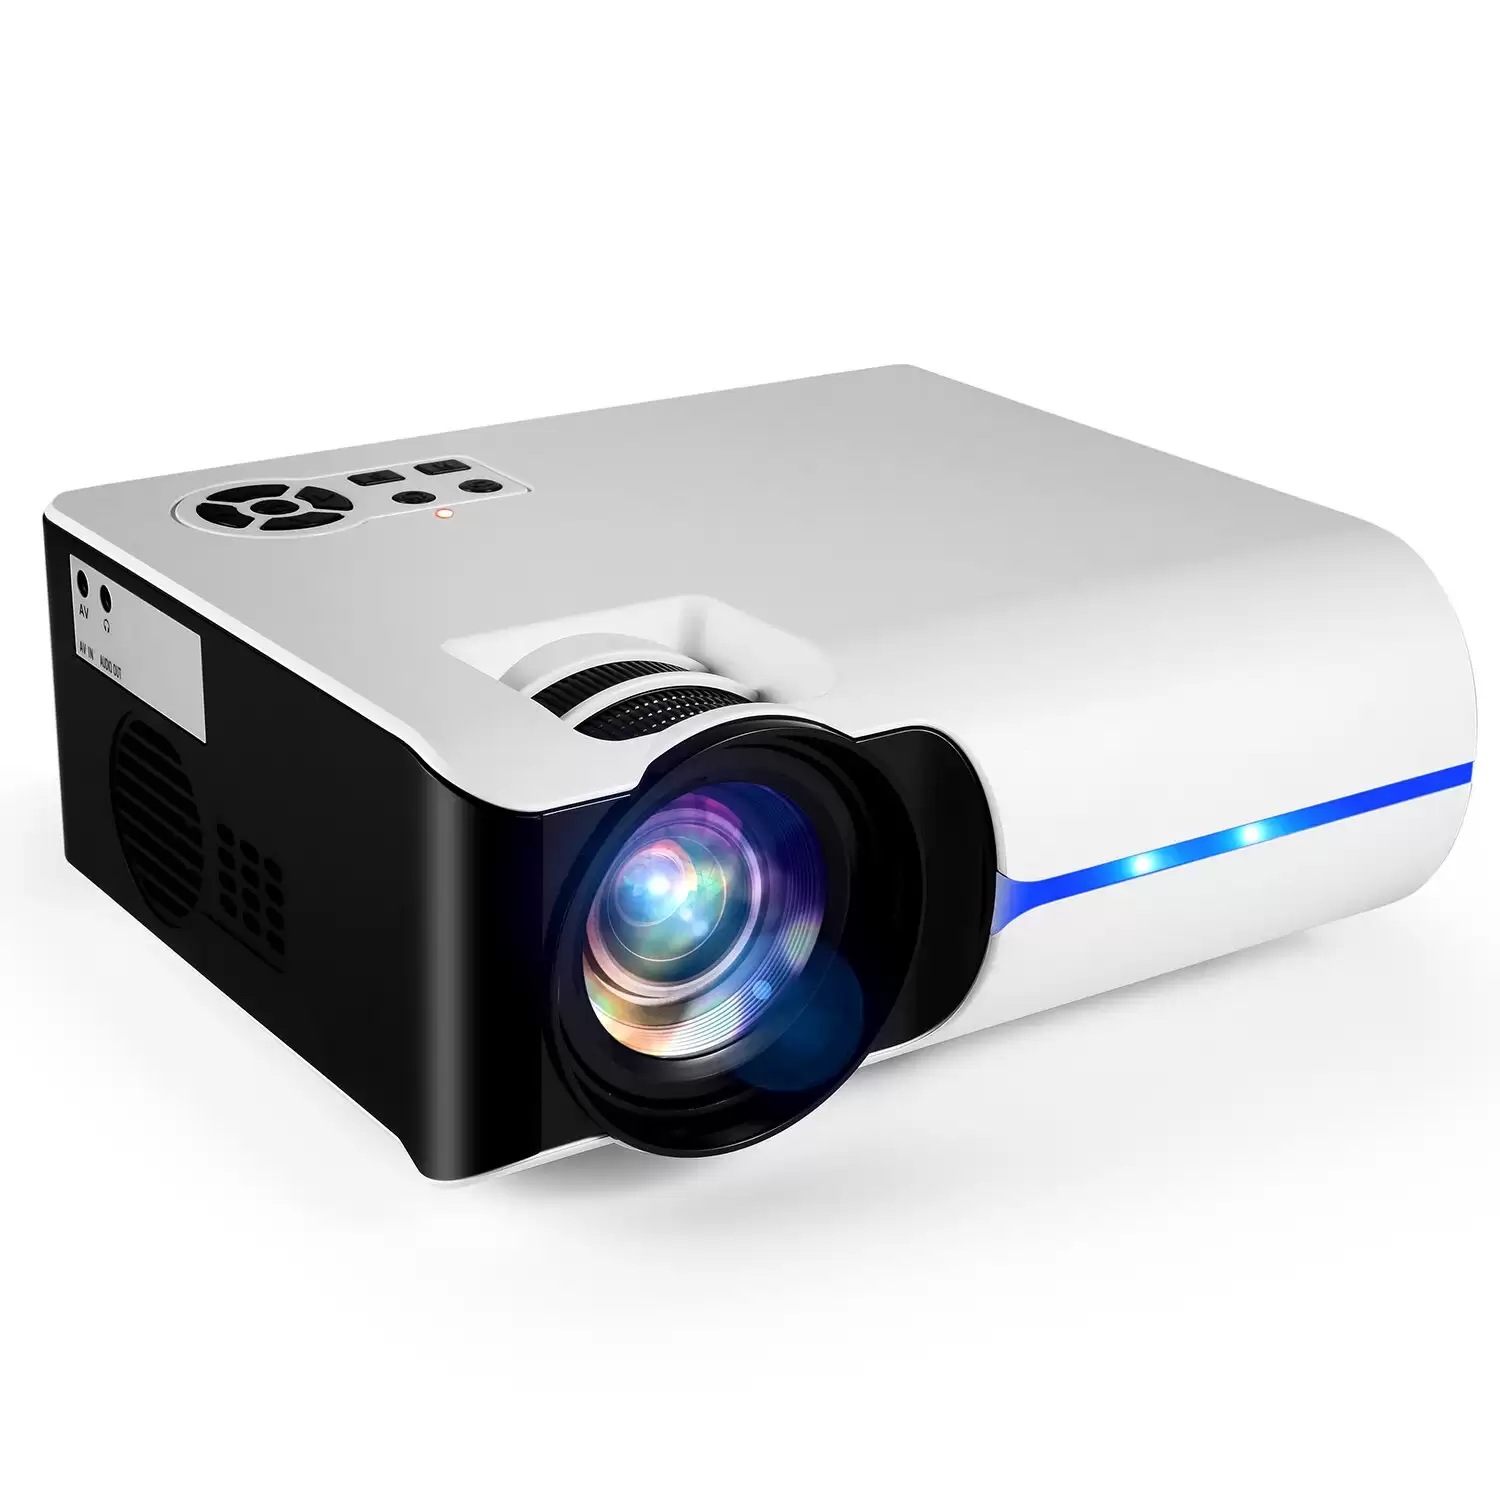 Order In Just $84.99 Vs315 Led Mini Projector Full Hd Supported 5000 Lumens 3500:1 Contrast Ratio 50000 Hours 150-inch Large Screen For Home Theater Outdoor Movie With This Coupon At Banggood